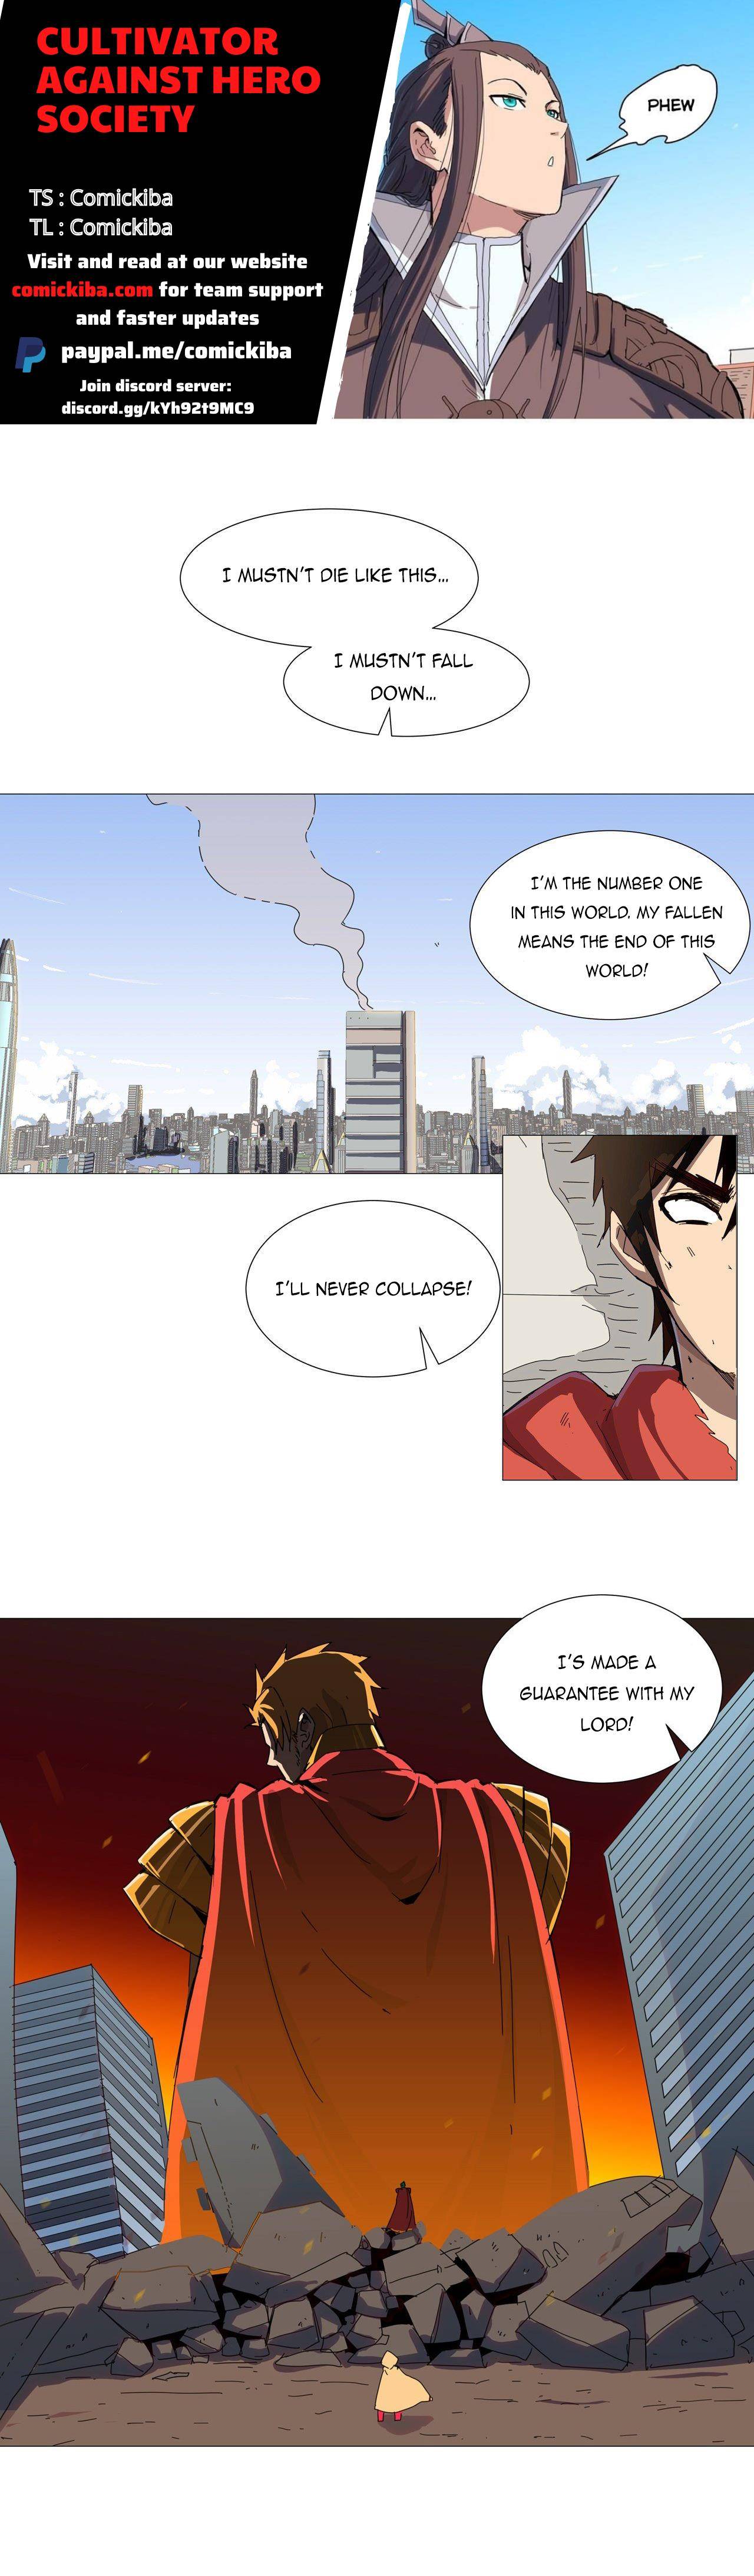 Cultivator Against Hero Society - Page 1